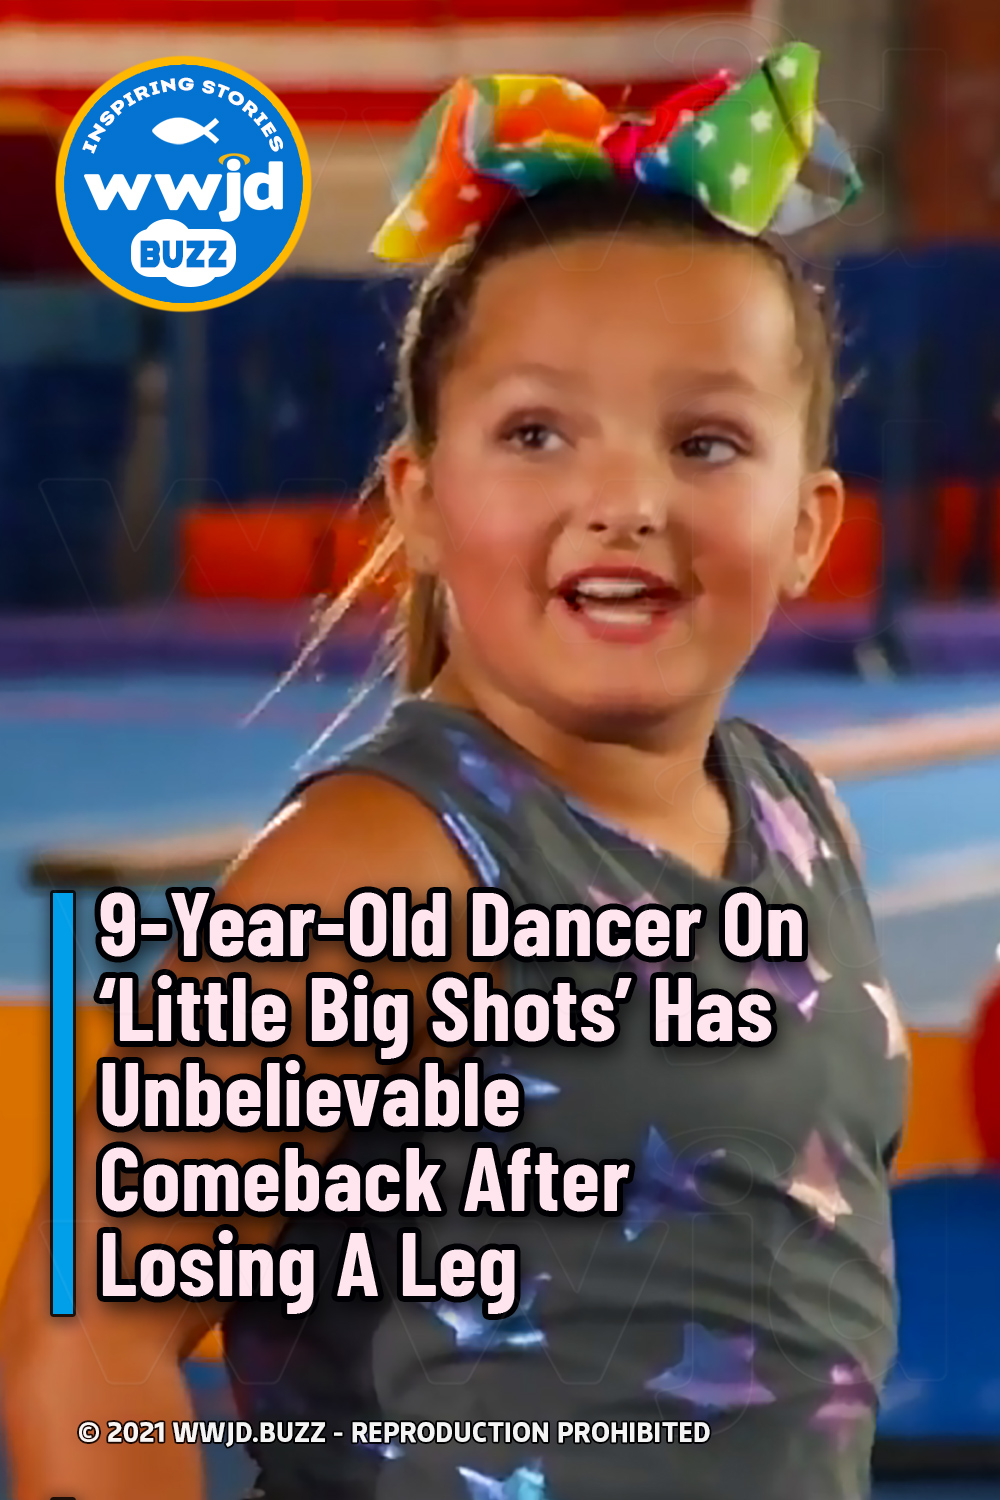 9-Year-Old Dancer On \'Little Big Shots\' Has Unbelievable Comeback After Losing A Leg